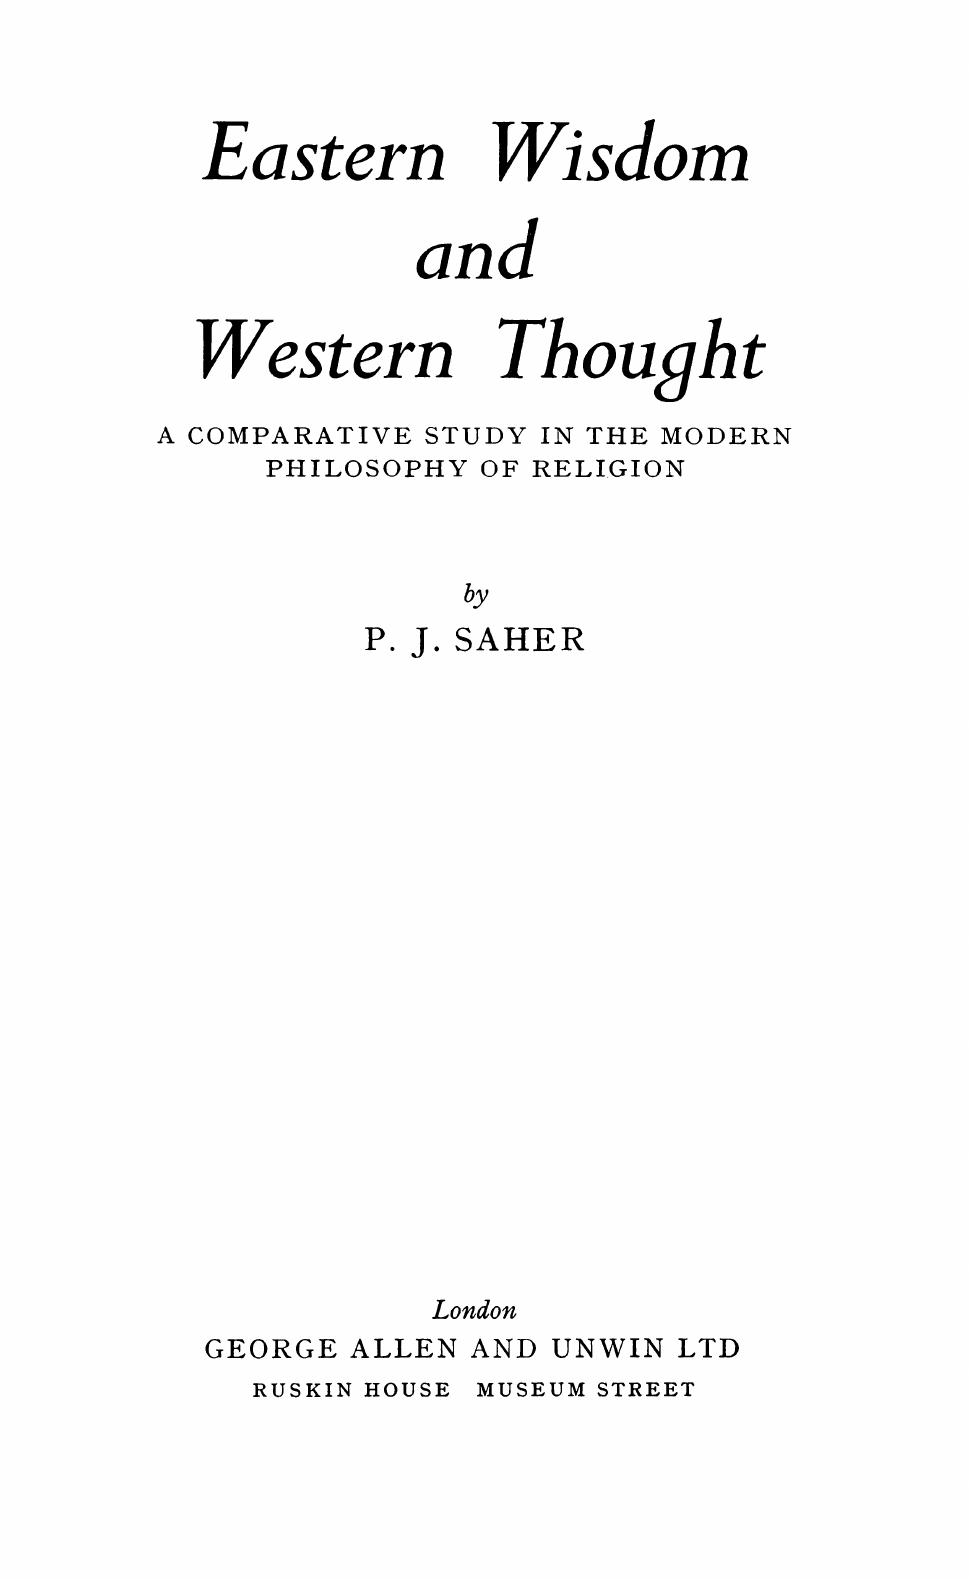 Eastern Wisdom and Western Thought: A Comparative Study in the Modern Philosophy of Religion